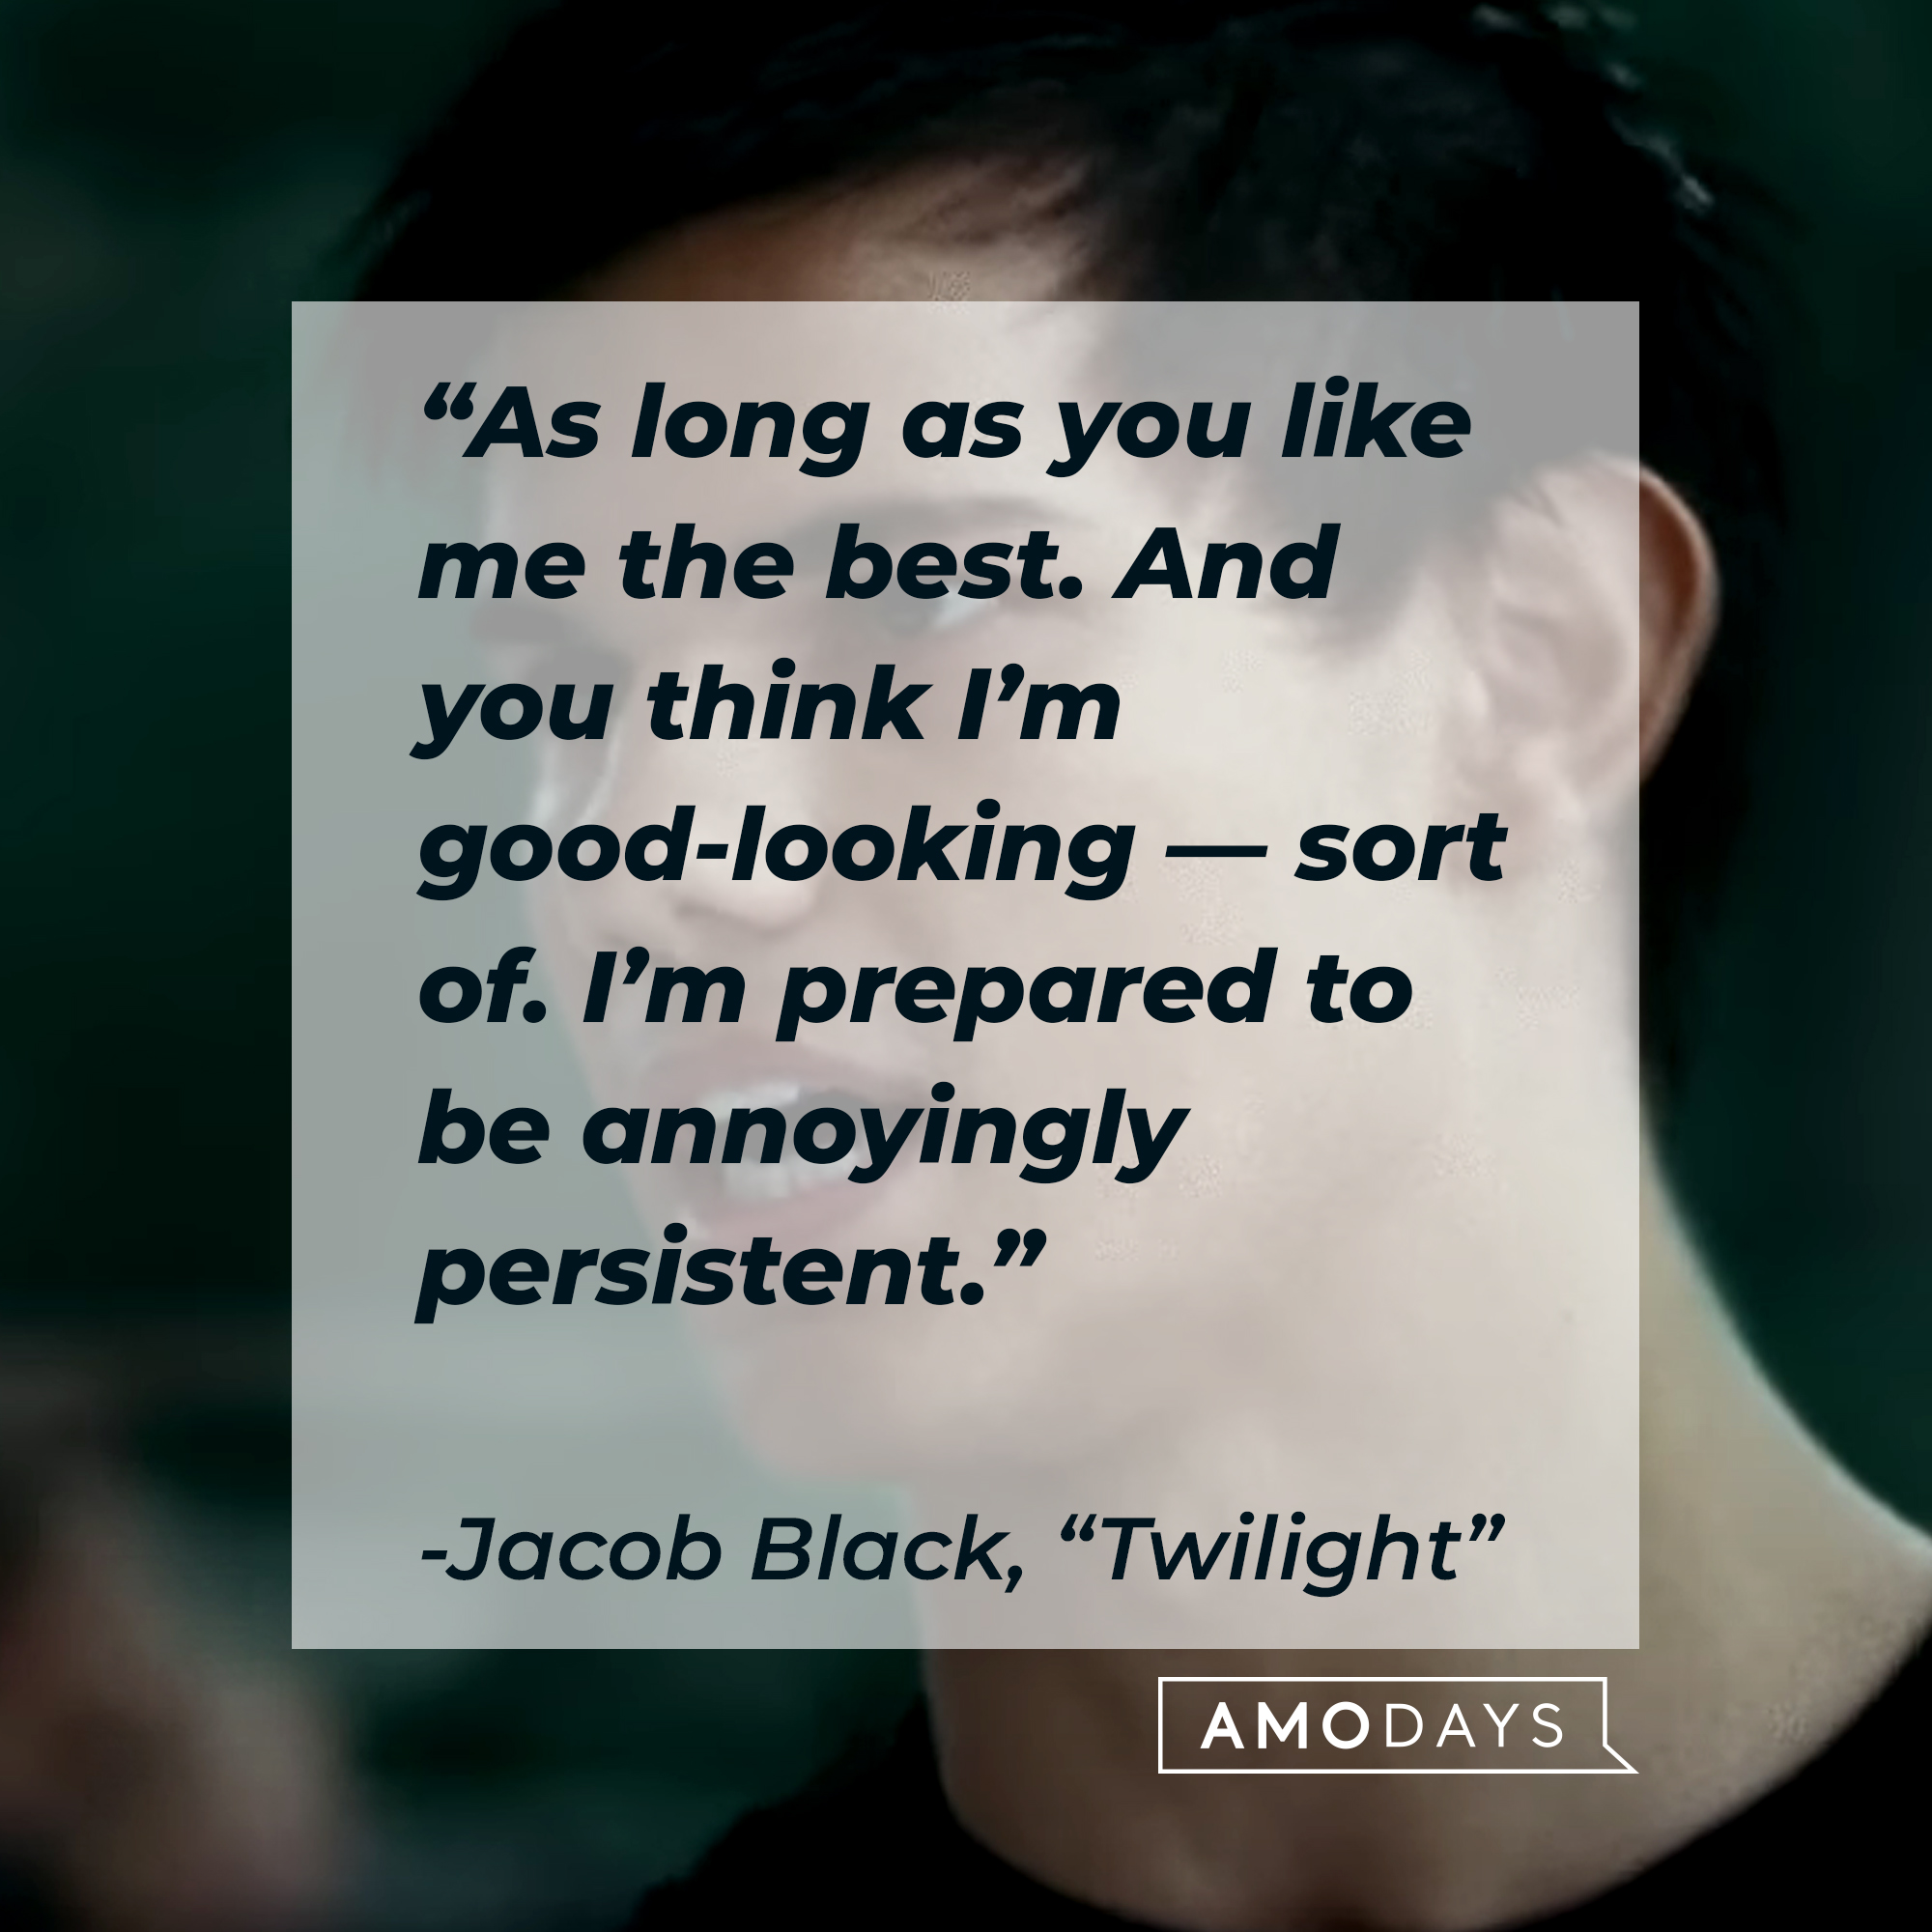 Image of Jacob Black with his quote in "Twilight:" “As long as you like me the best. And you think I’m good-looking—sort of. I’m prepared to be annoyingly persistent.” | Source: Facebook.com/twilight